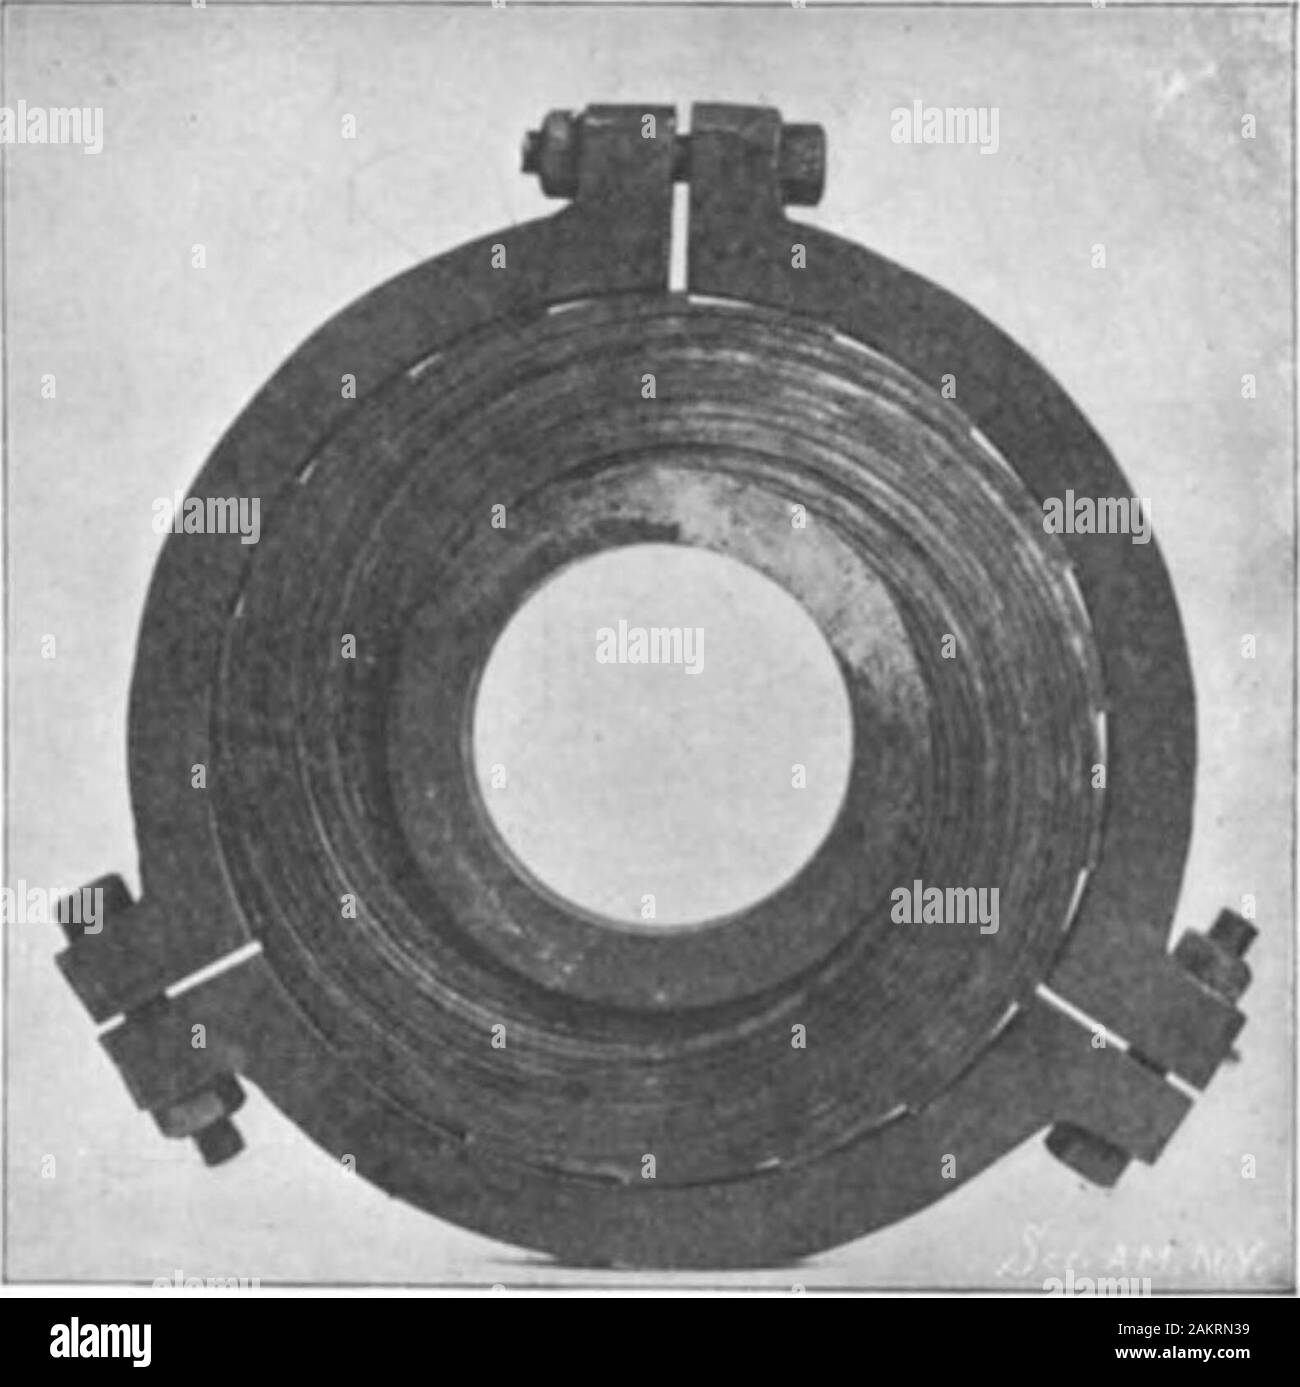 Scientific American Volume 85 Number 10 (September 1901) . View at Muzzle Showing Curved Sheets in AssemblingRing Before Liner is Inserted. Group of Involuted Steel Sheets.NEW 5-INCH, SEGMENTAL, WIBE-TTJBE GUN FOB THE UNITES STATES ABMY. Section Through Sheet-Steel Tube, Showing Liner andAssembling Clamp. September 7, 1901. larged to the required dimensions, and, judging fromthe results already achieved, when the gun gave its 575-pound shell a velocity of 2,503 feet per second, it isfully expected that the desired velocity of 2,800 feet persecond will he obtained. The piece will then equal inv Stock Photo